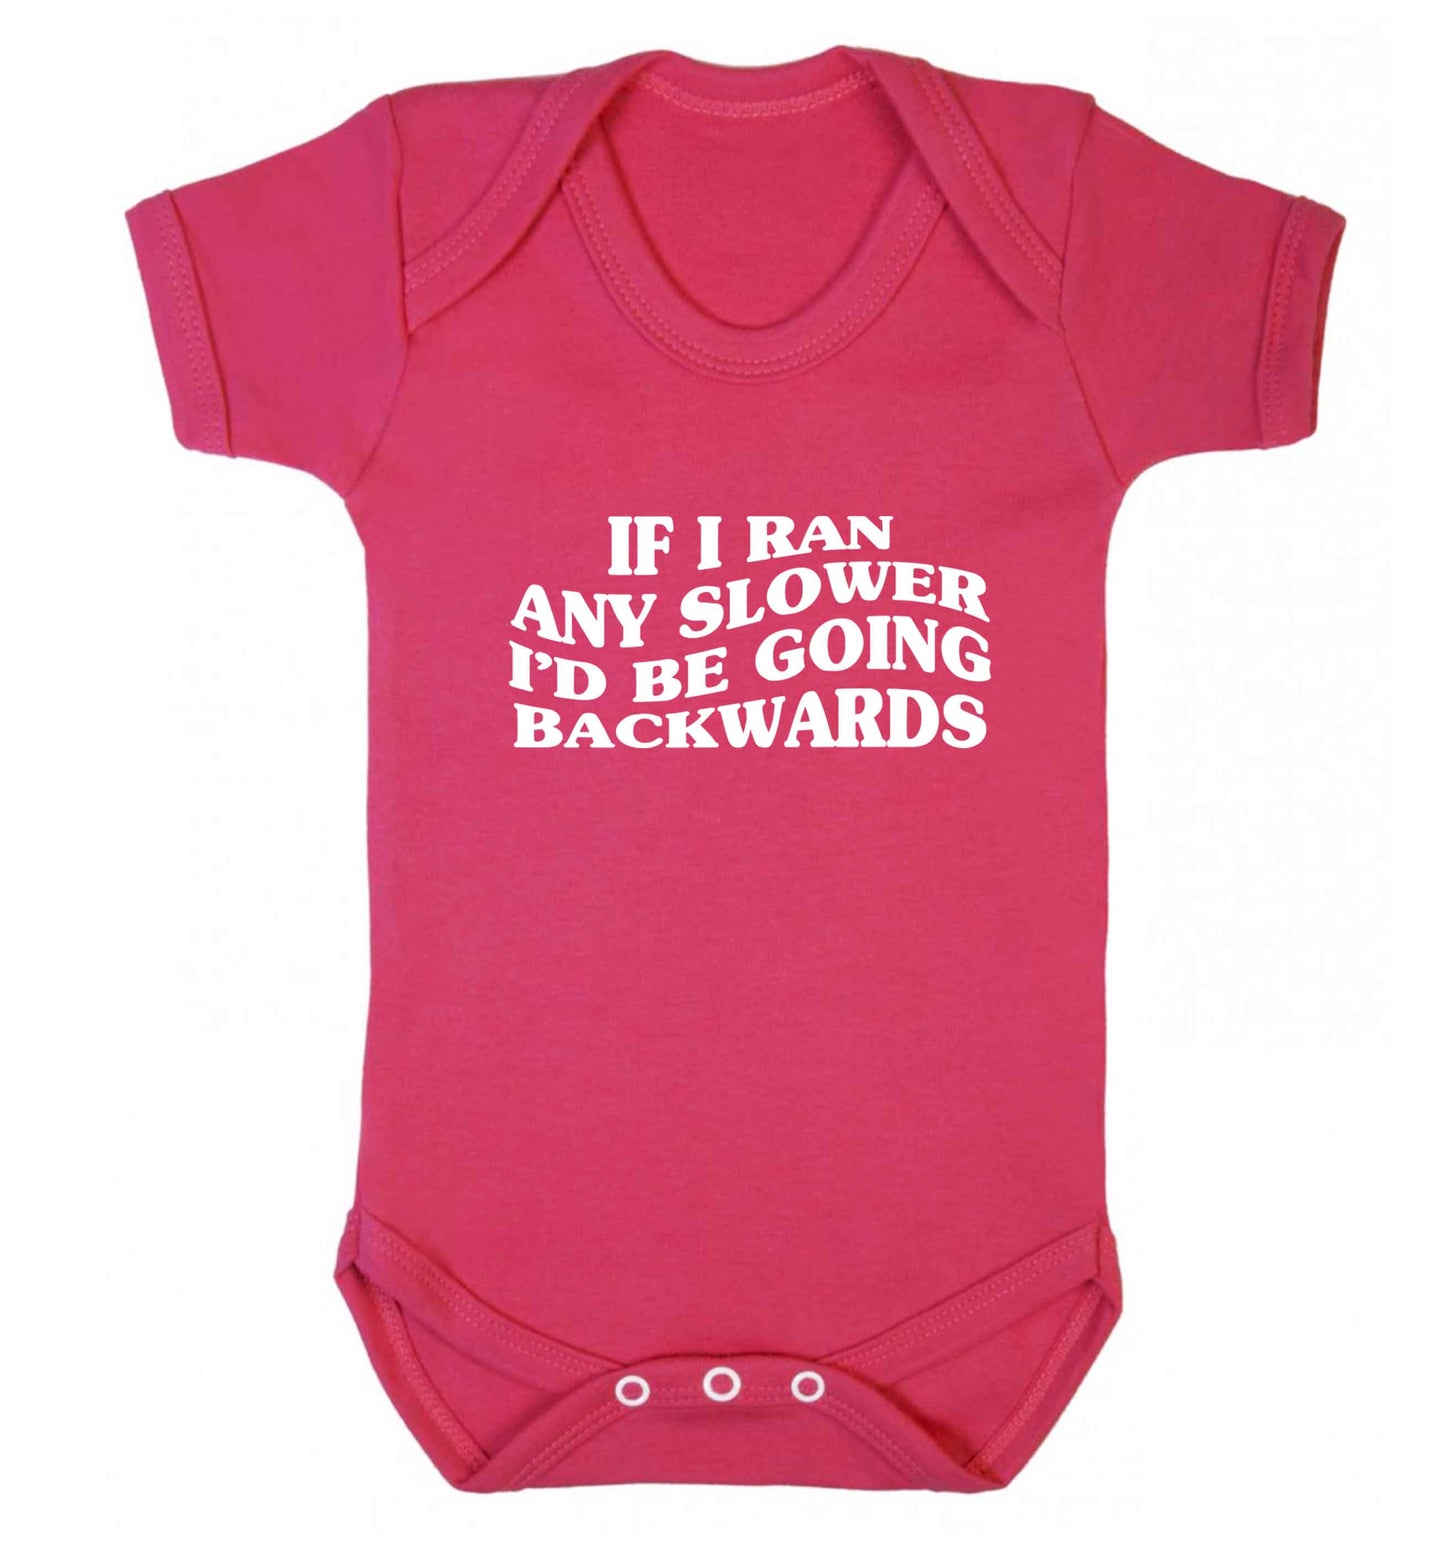 If I ran any slower I'd be going backwards baby vest dark pink 18-24 months